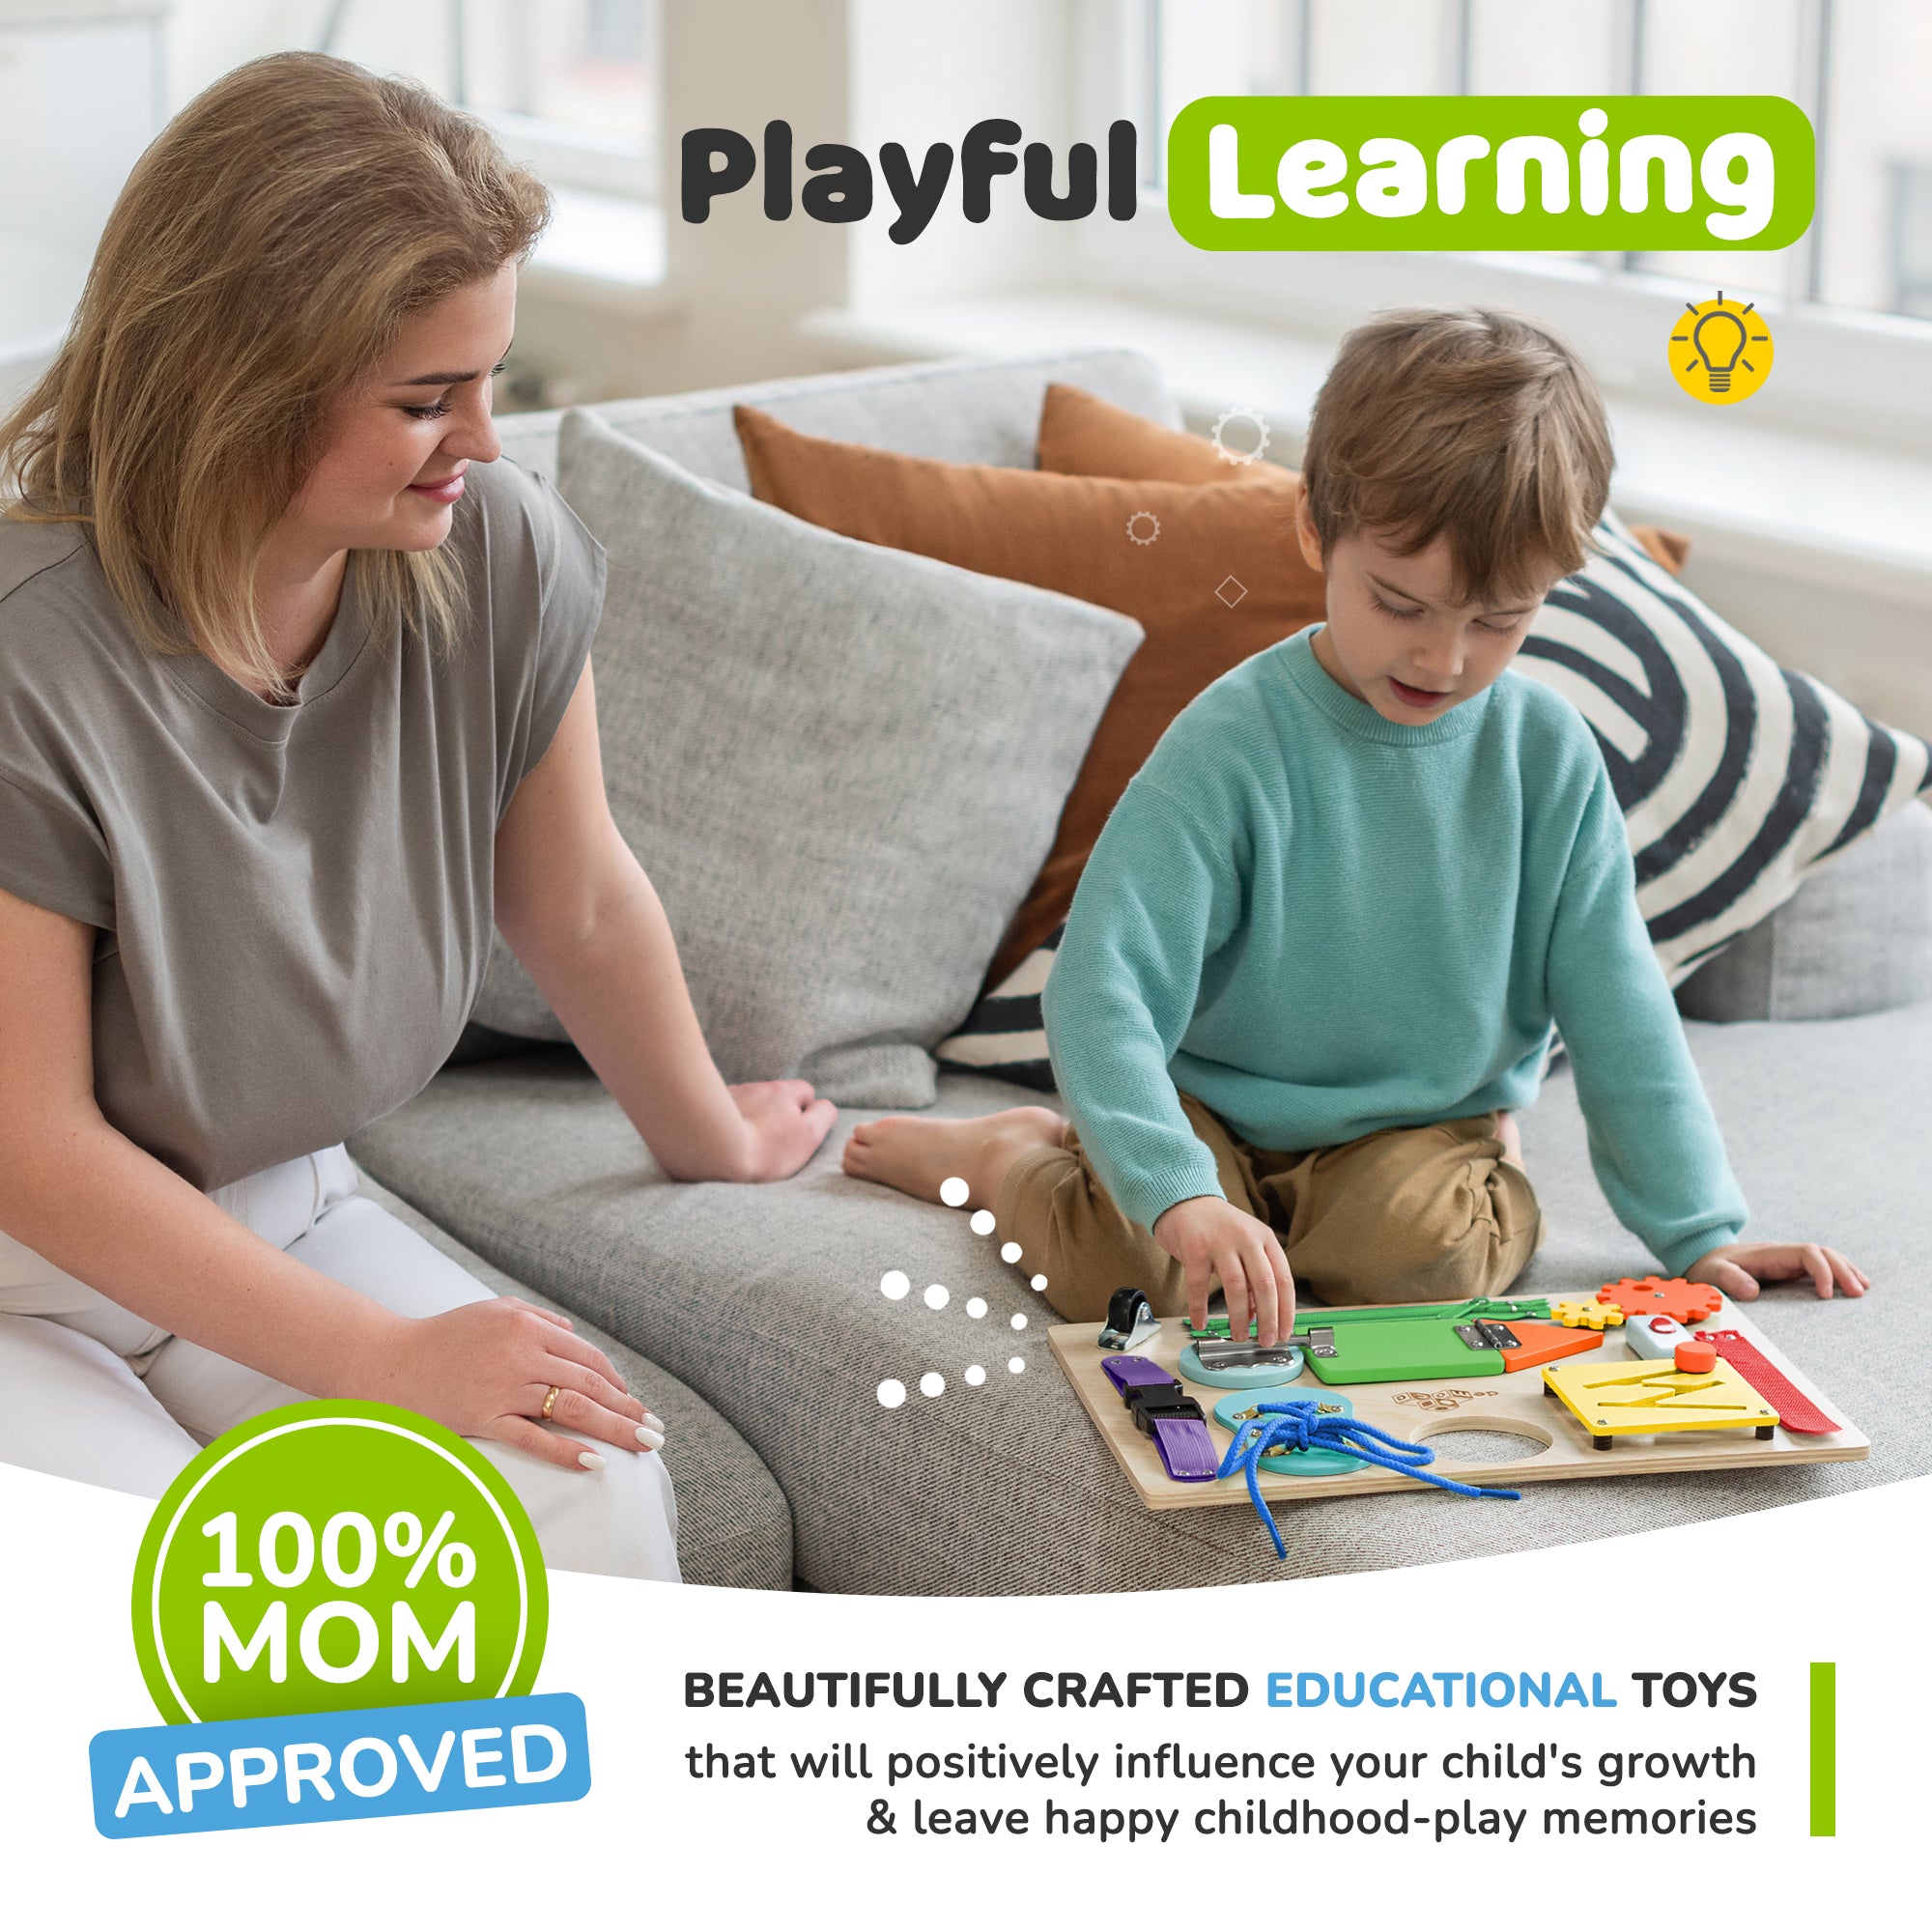 Busy Board for Toddlers 2 - Assistive Technology